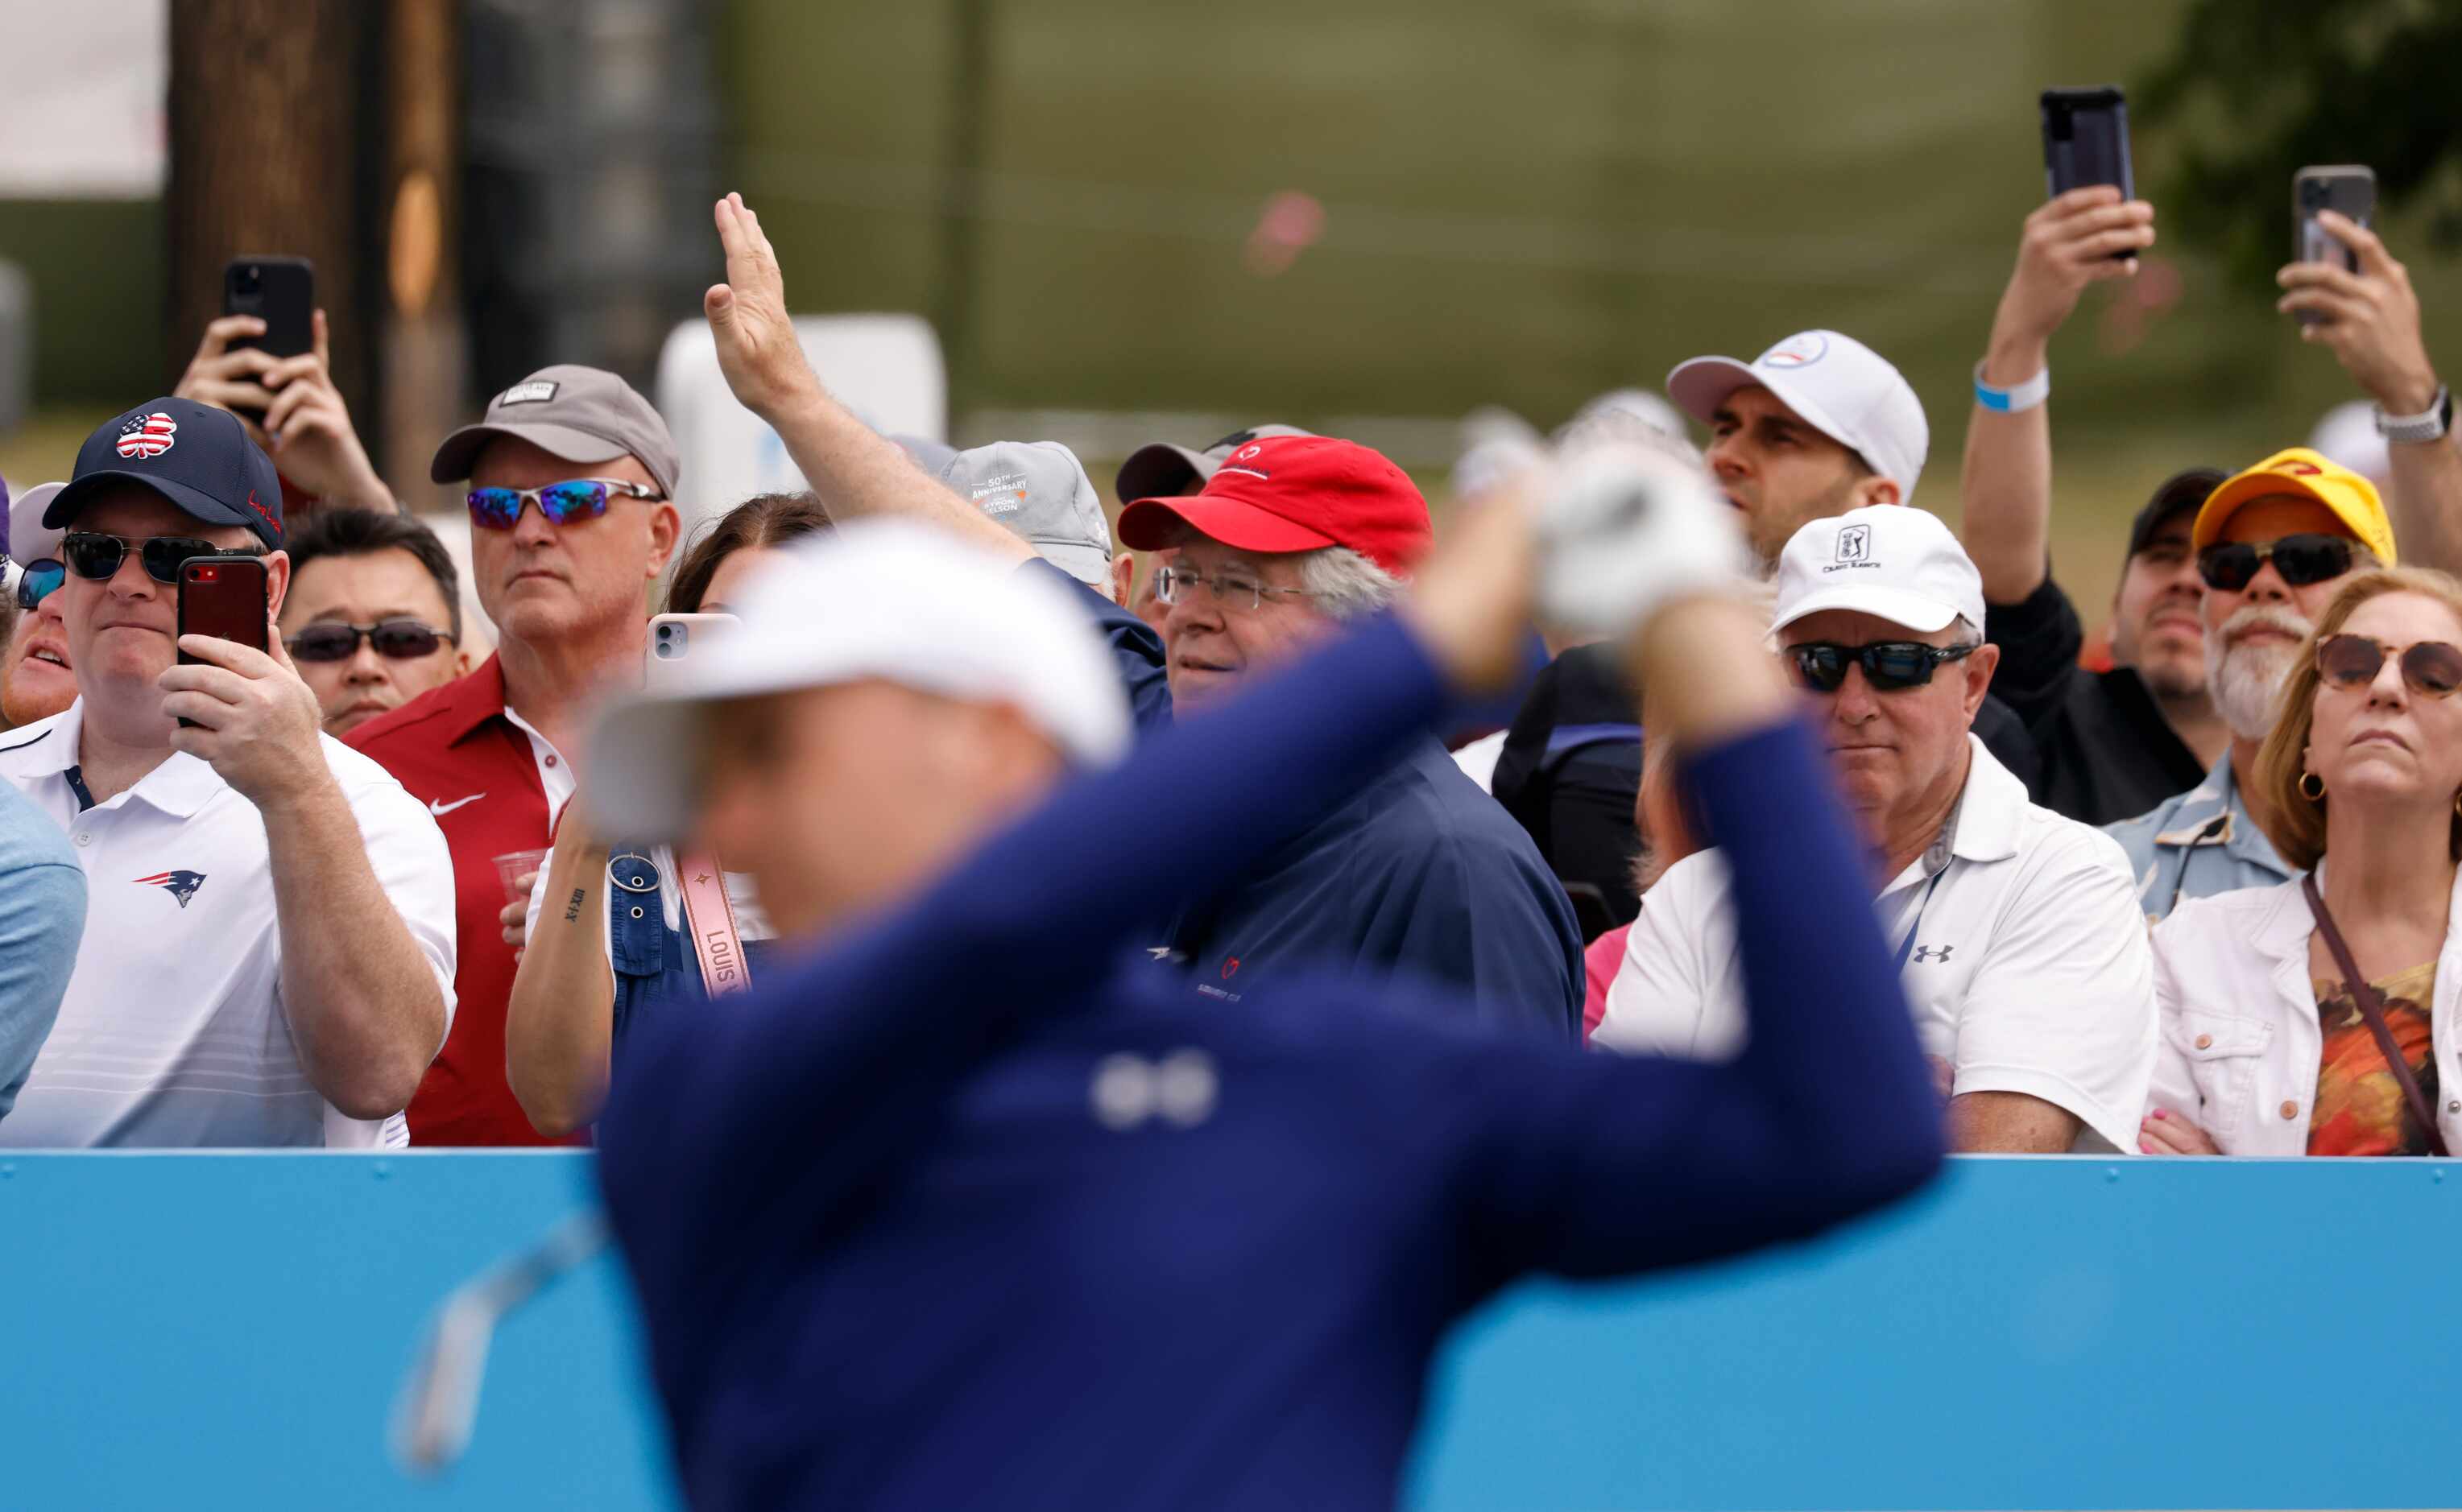 Some fans watch the path of Jordan Spieth's ball as others Fans record Spieth on the 7th tee...